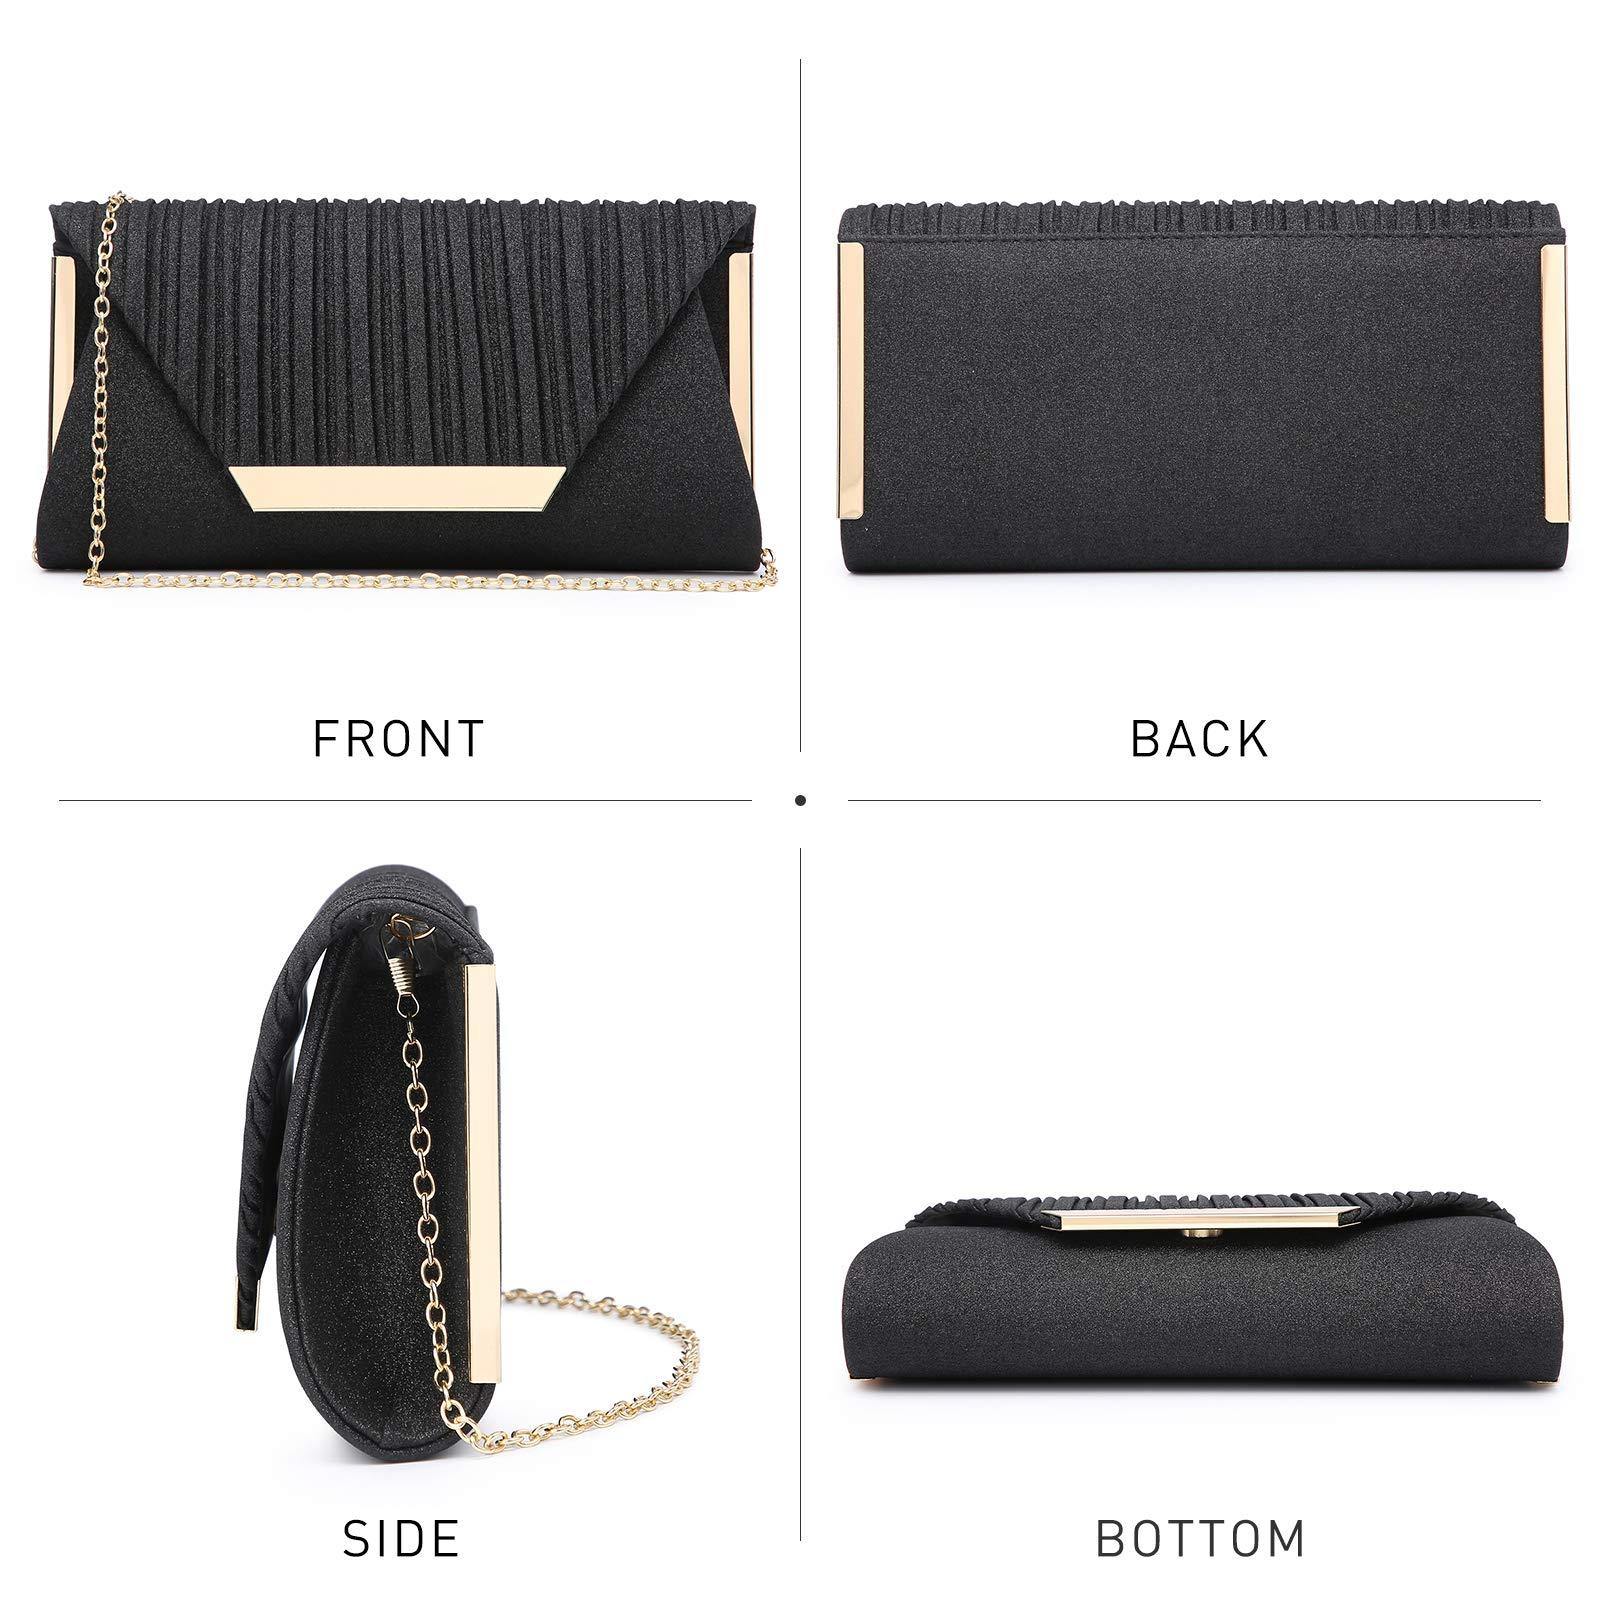 Classic Black Envelope Clutch by Kate Spade